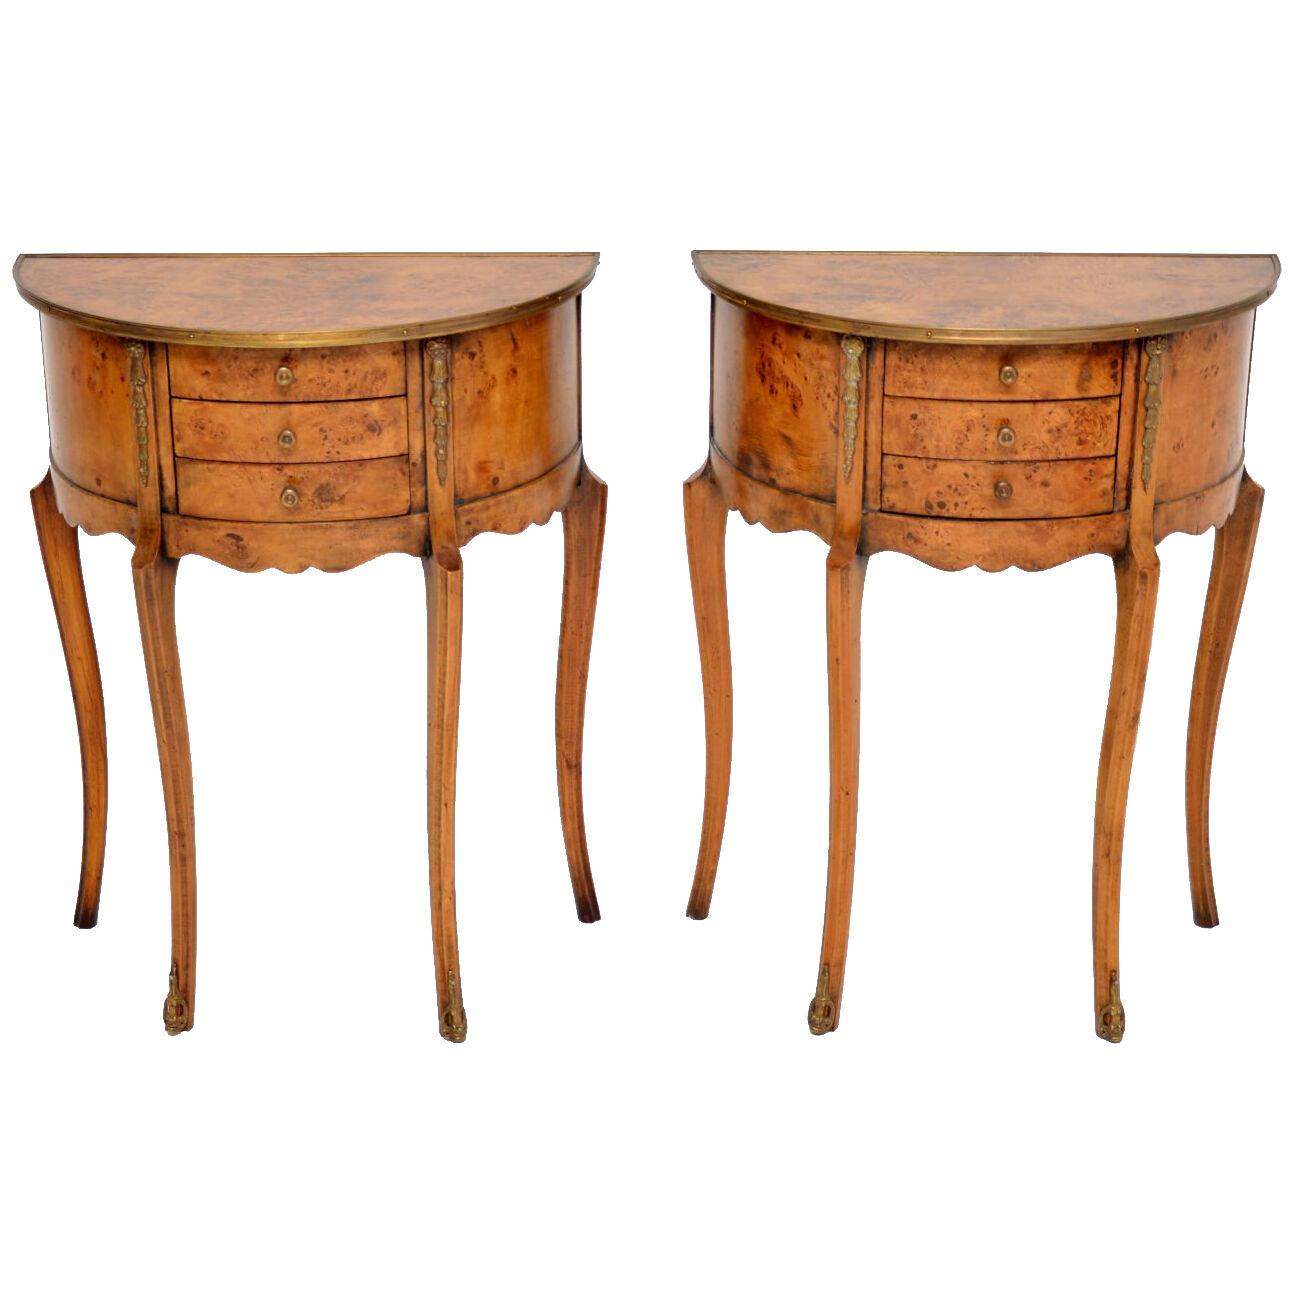 Pair of Antique French Burr Walnut Side Tables